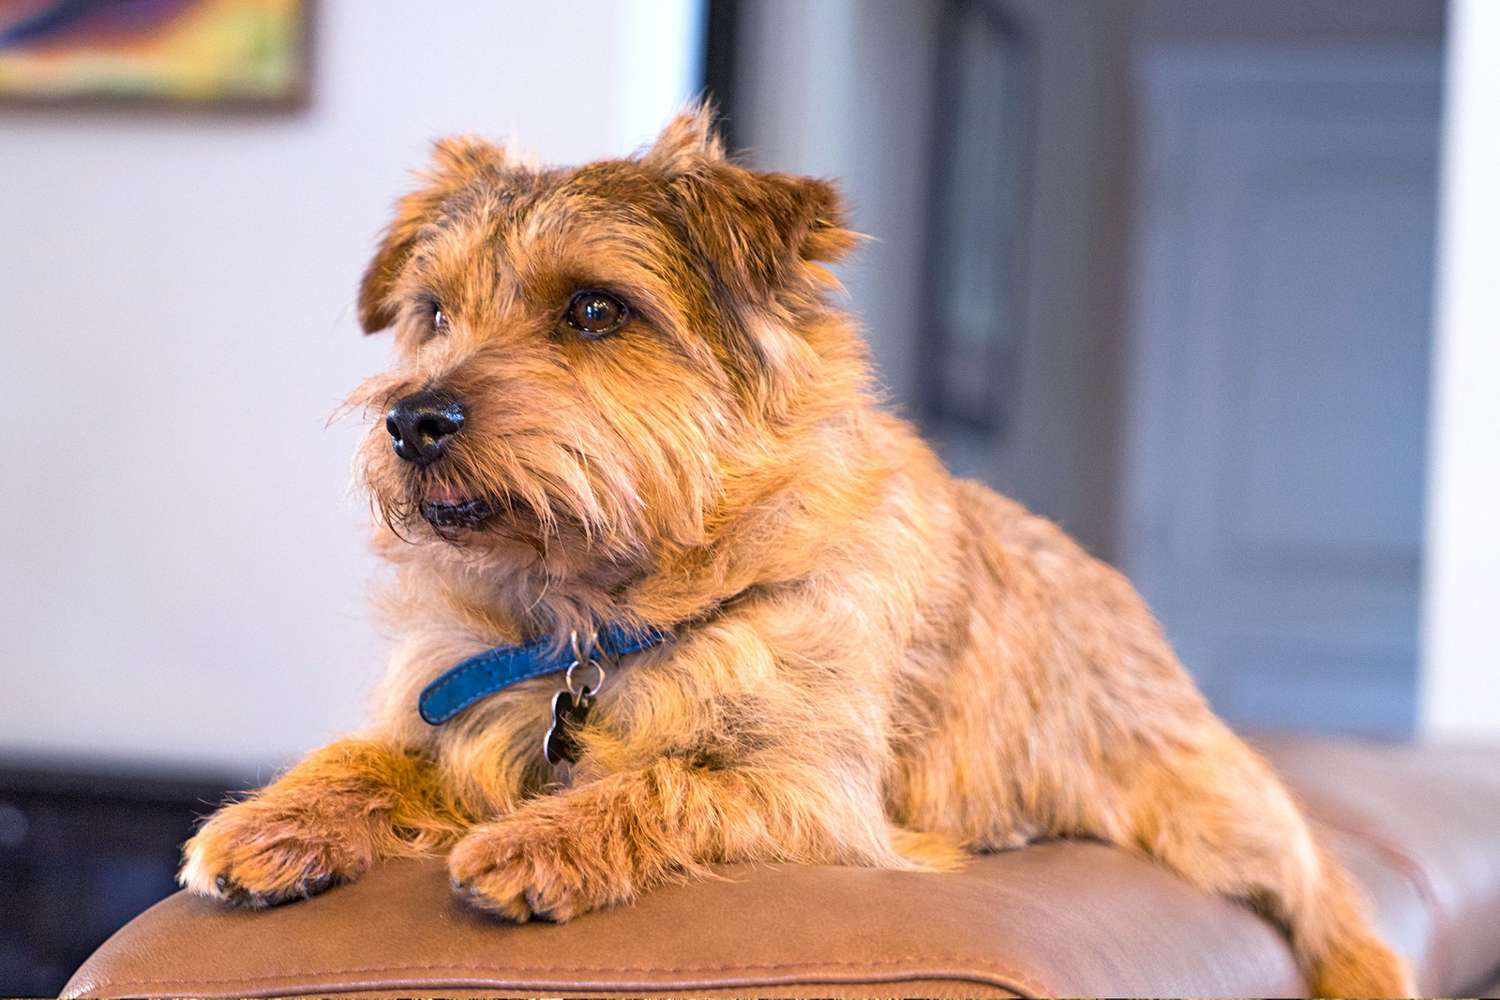 Blonde brindle norfolk terrier lays on tan leather couch indoors